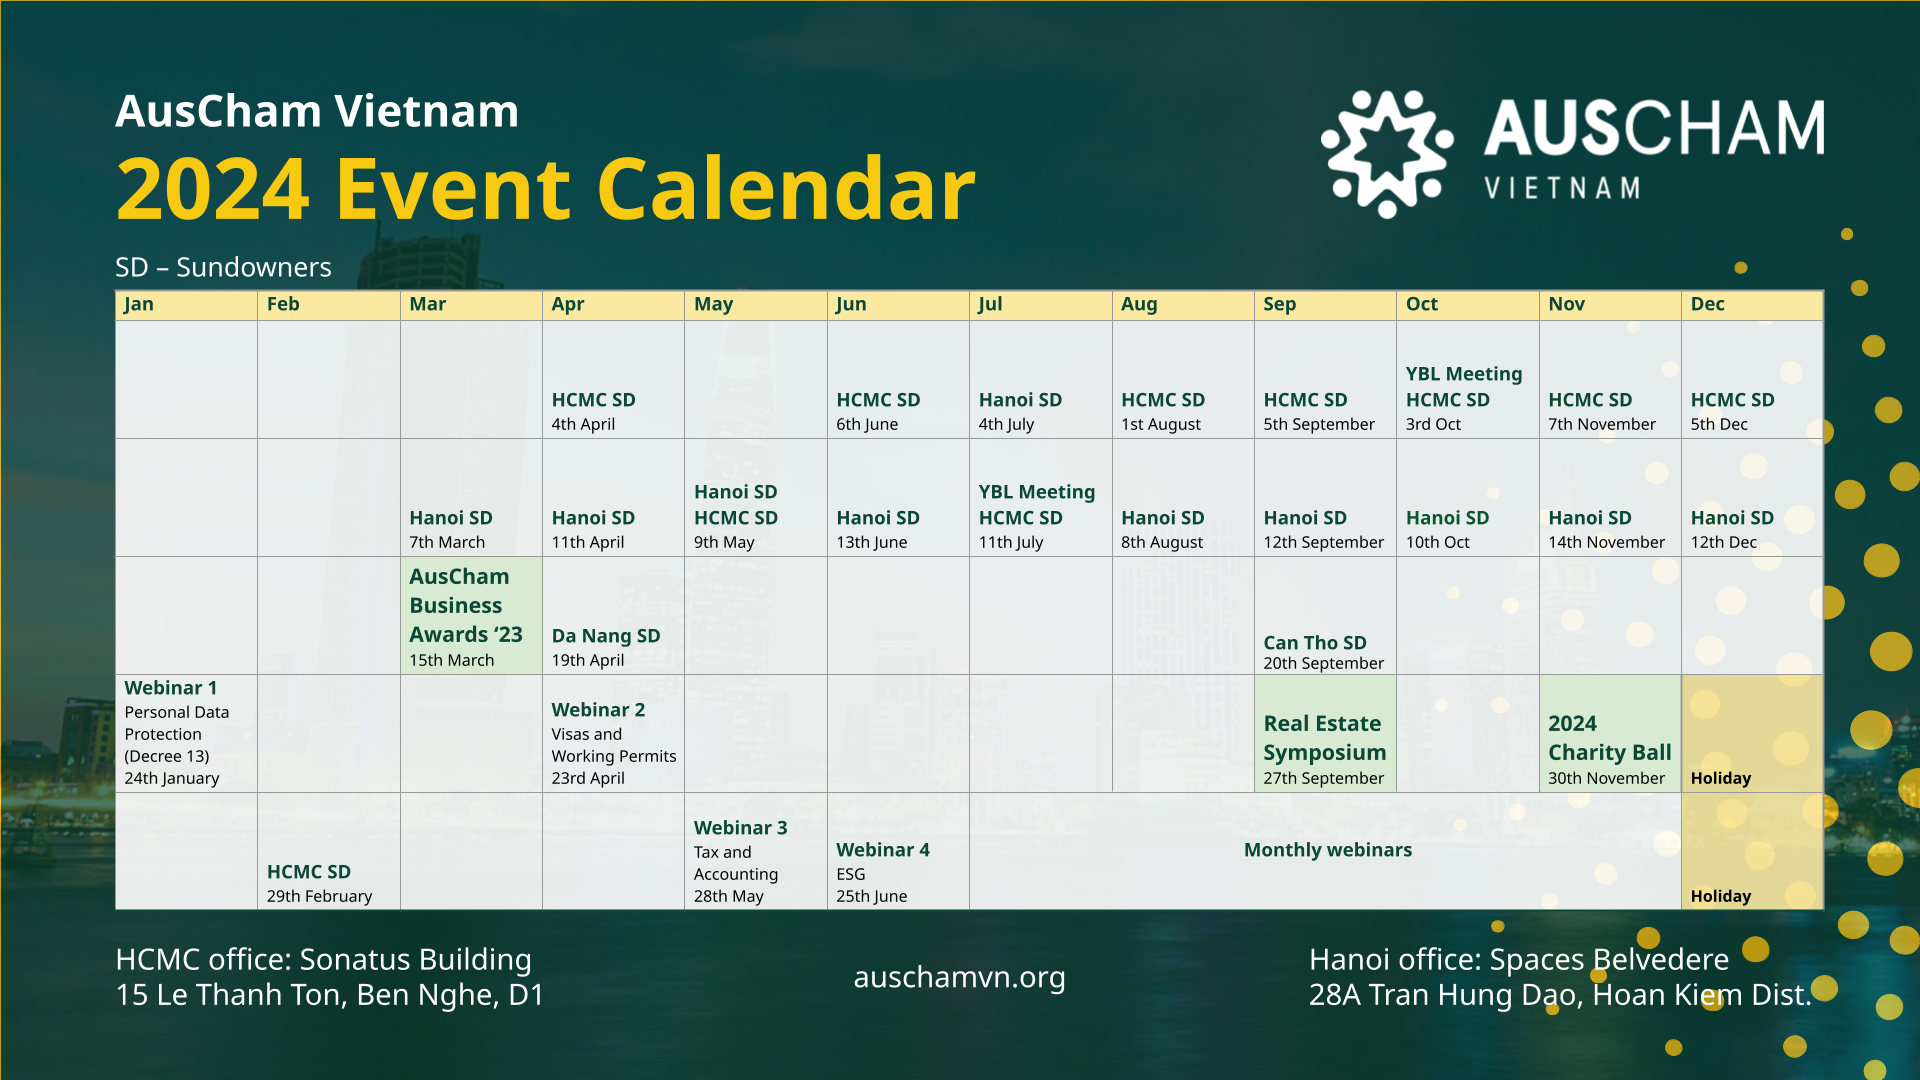 AusCham Event calendar for 2024 - monthly networking events and signature events in September, November, and March